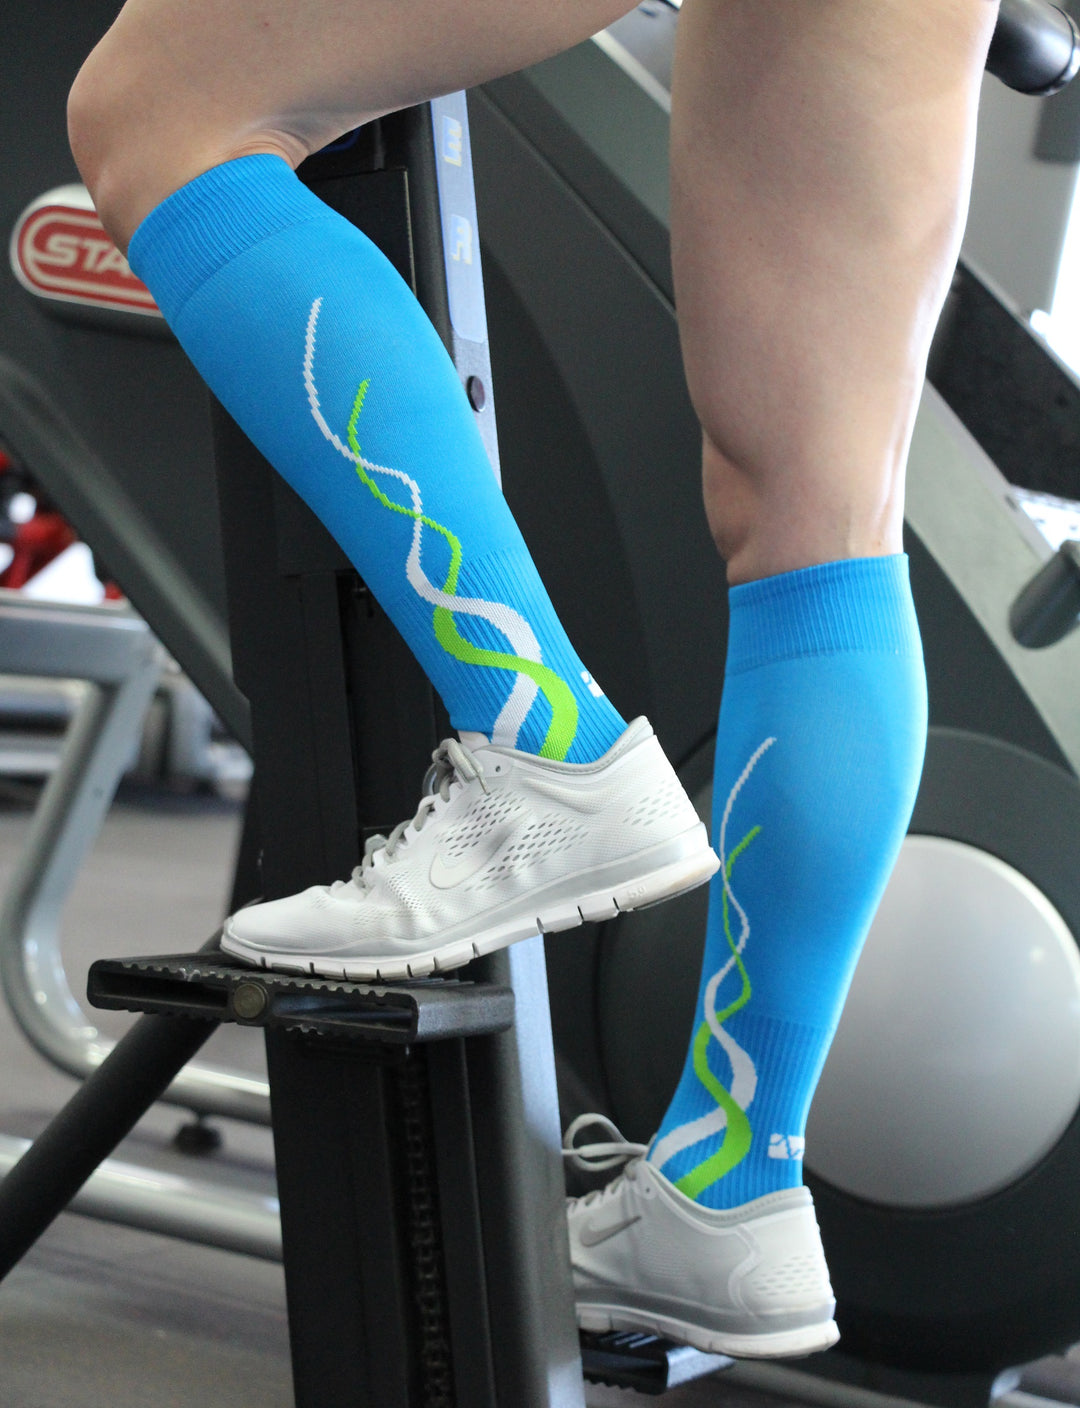 Woman using Stairmaster while wearing over the calf compression socks.